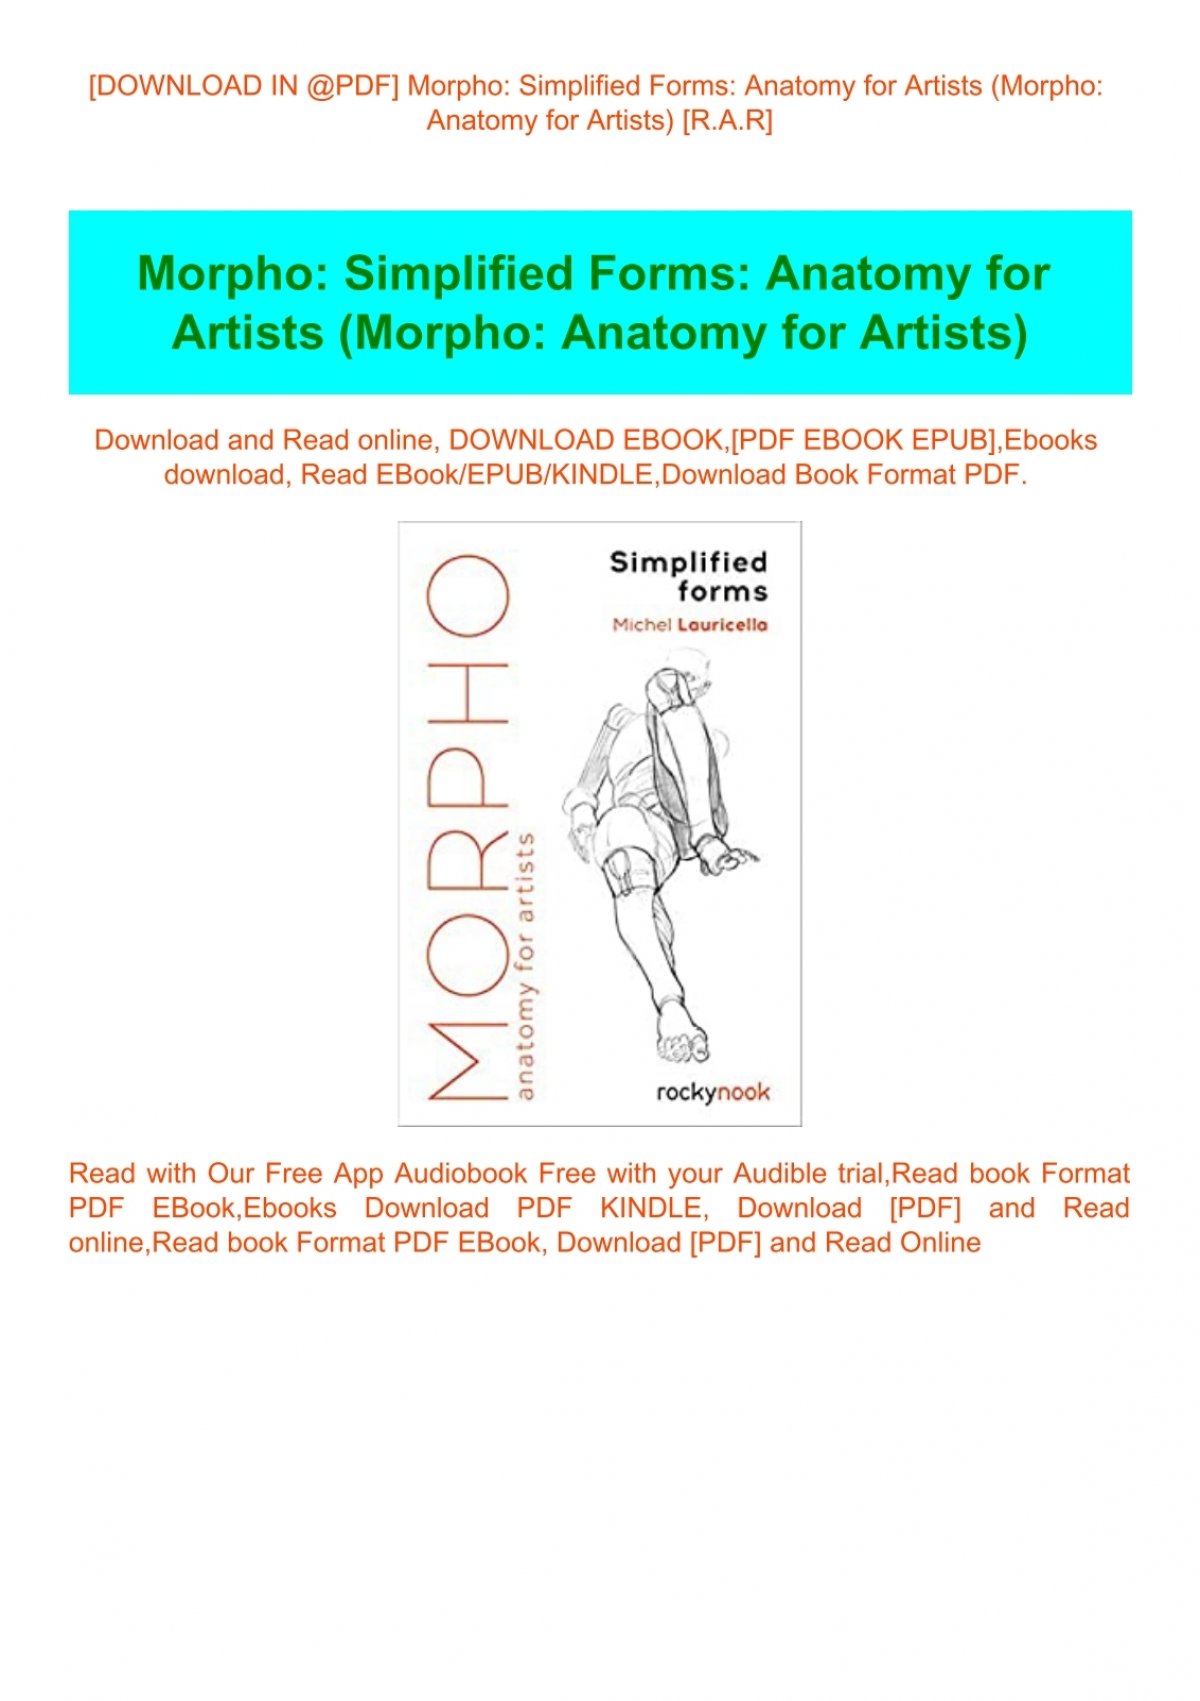 download-in-pdf-morpho-simplified-forms-anatomy-for-artists-morpho